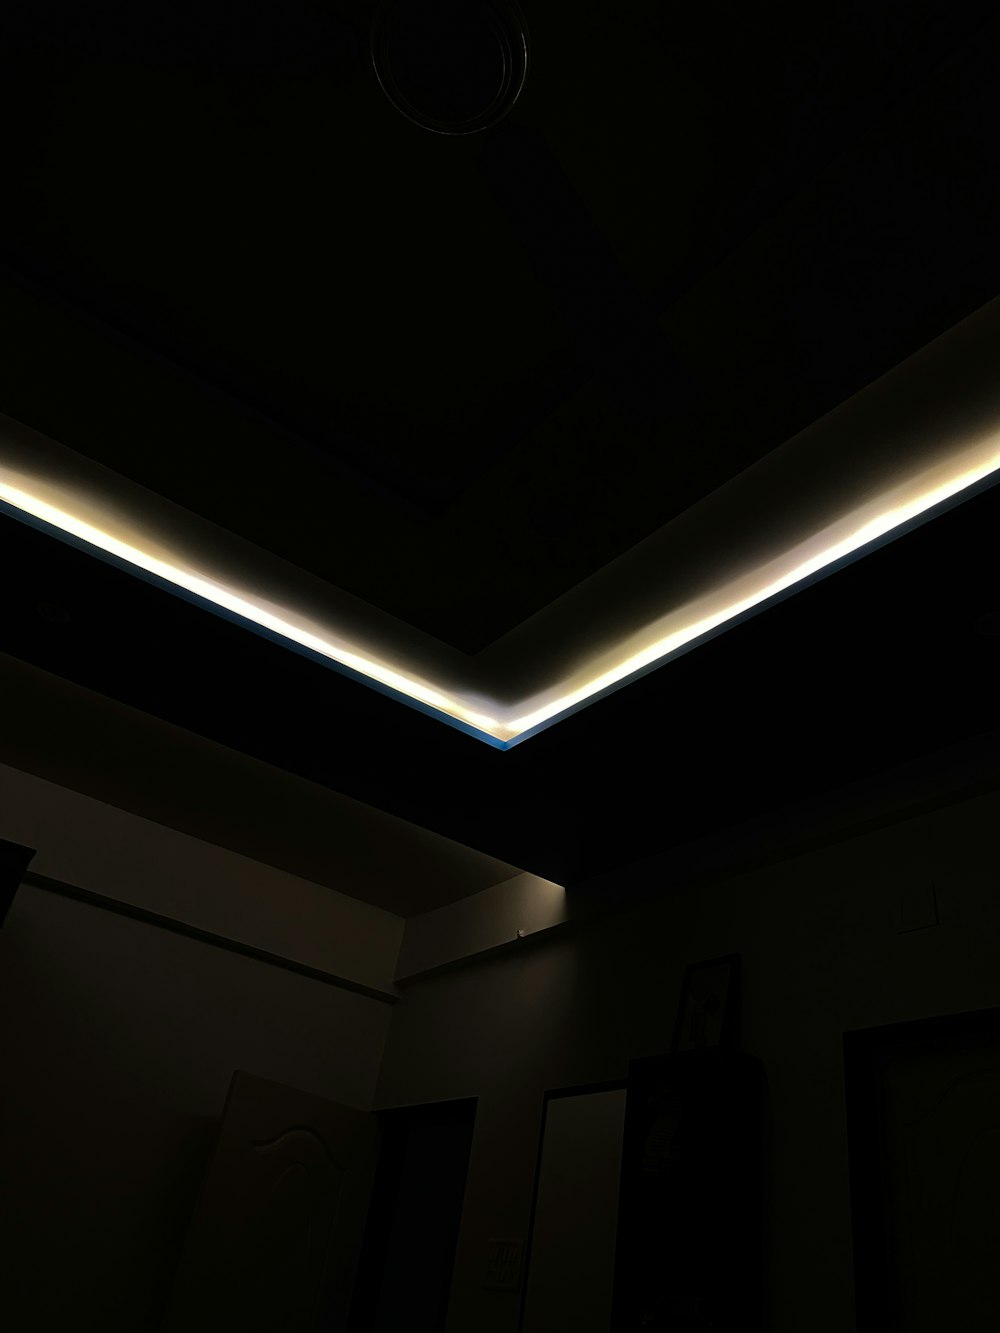 a dark room with a light on the ceiling